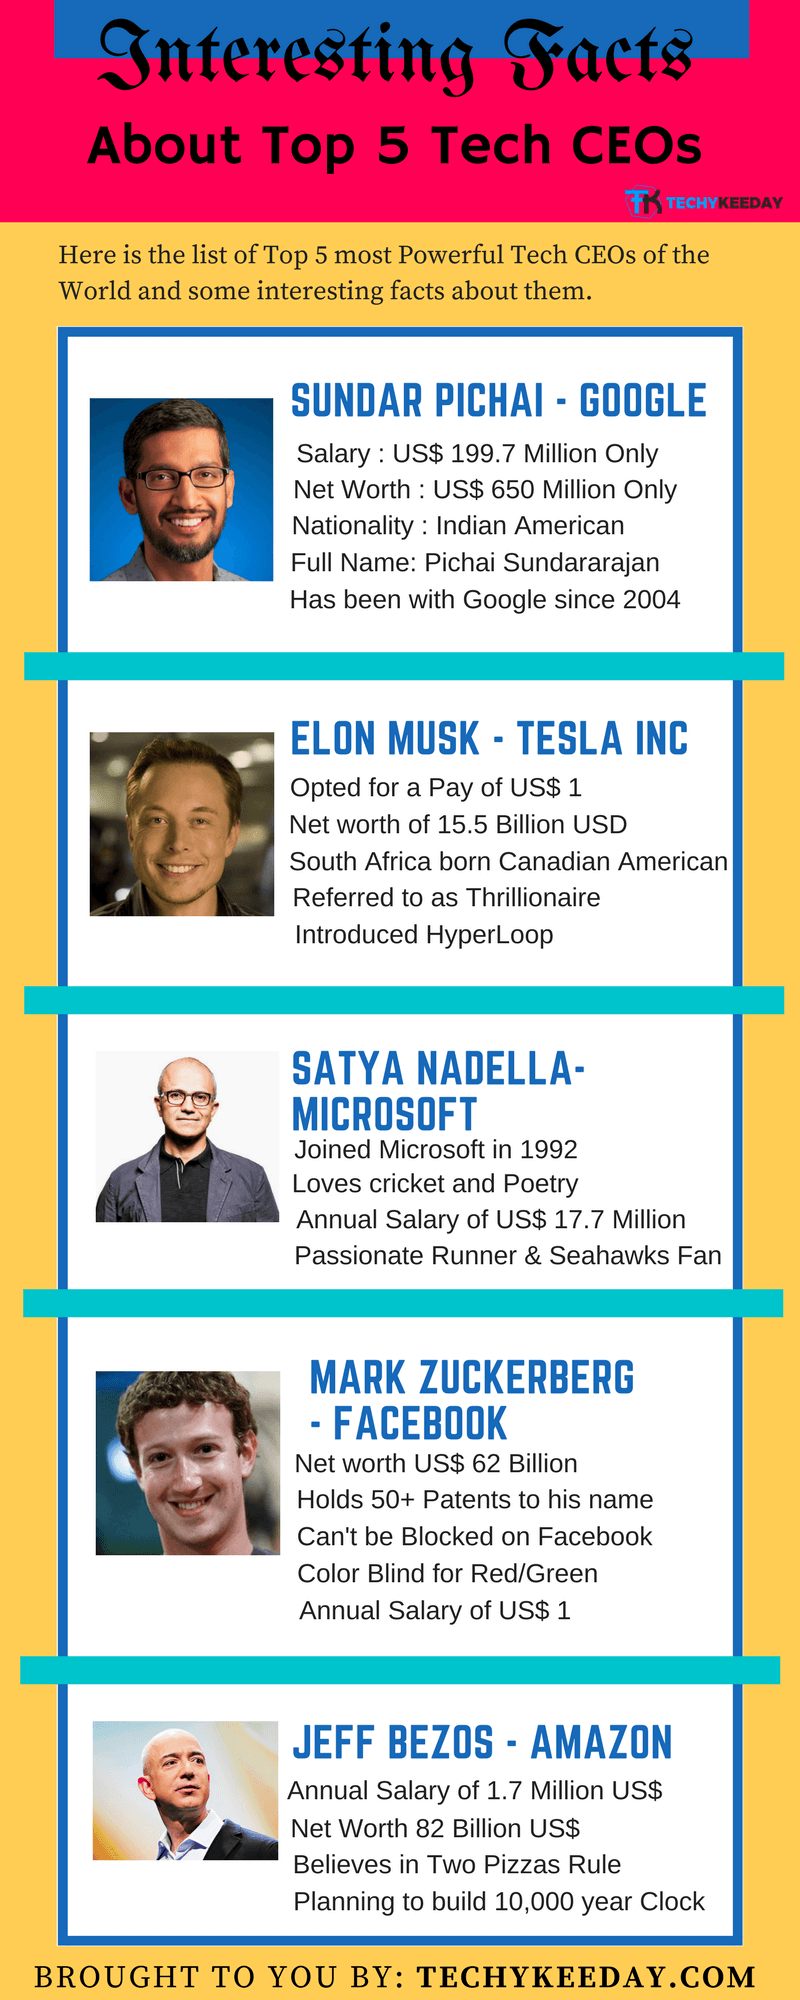 Top 5 Tech CEOs & Interesting Facts about them